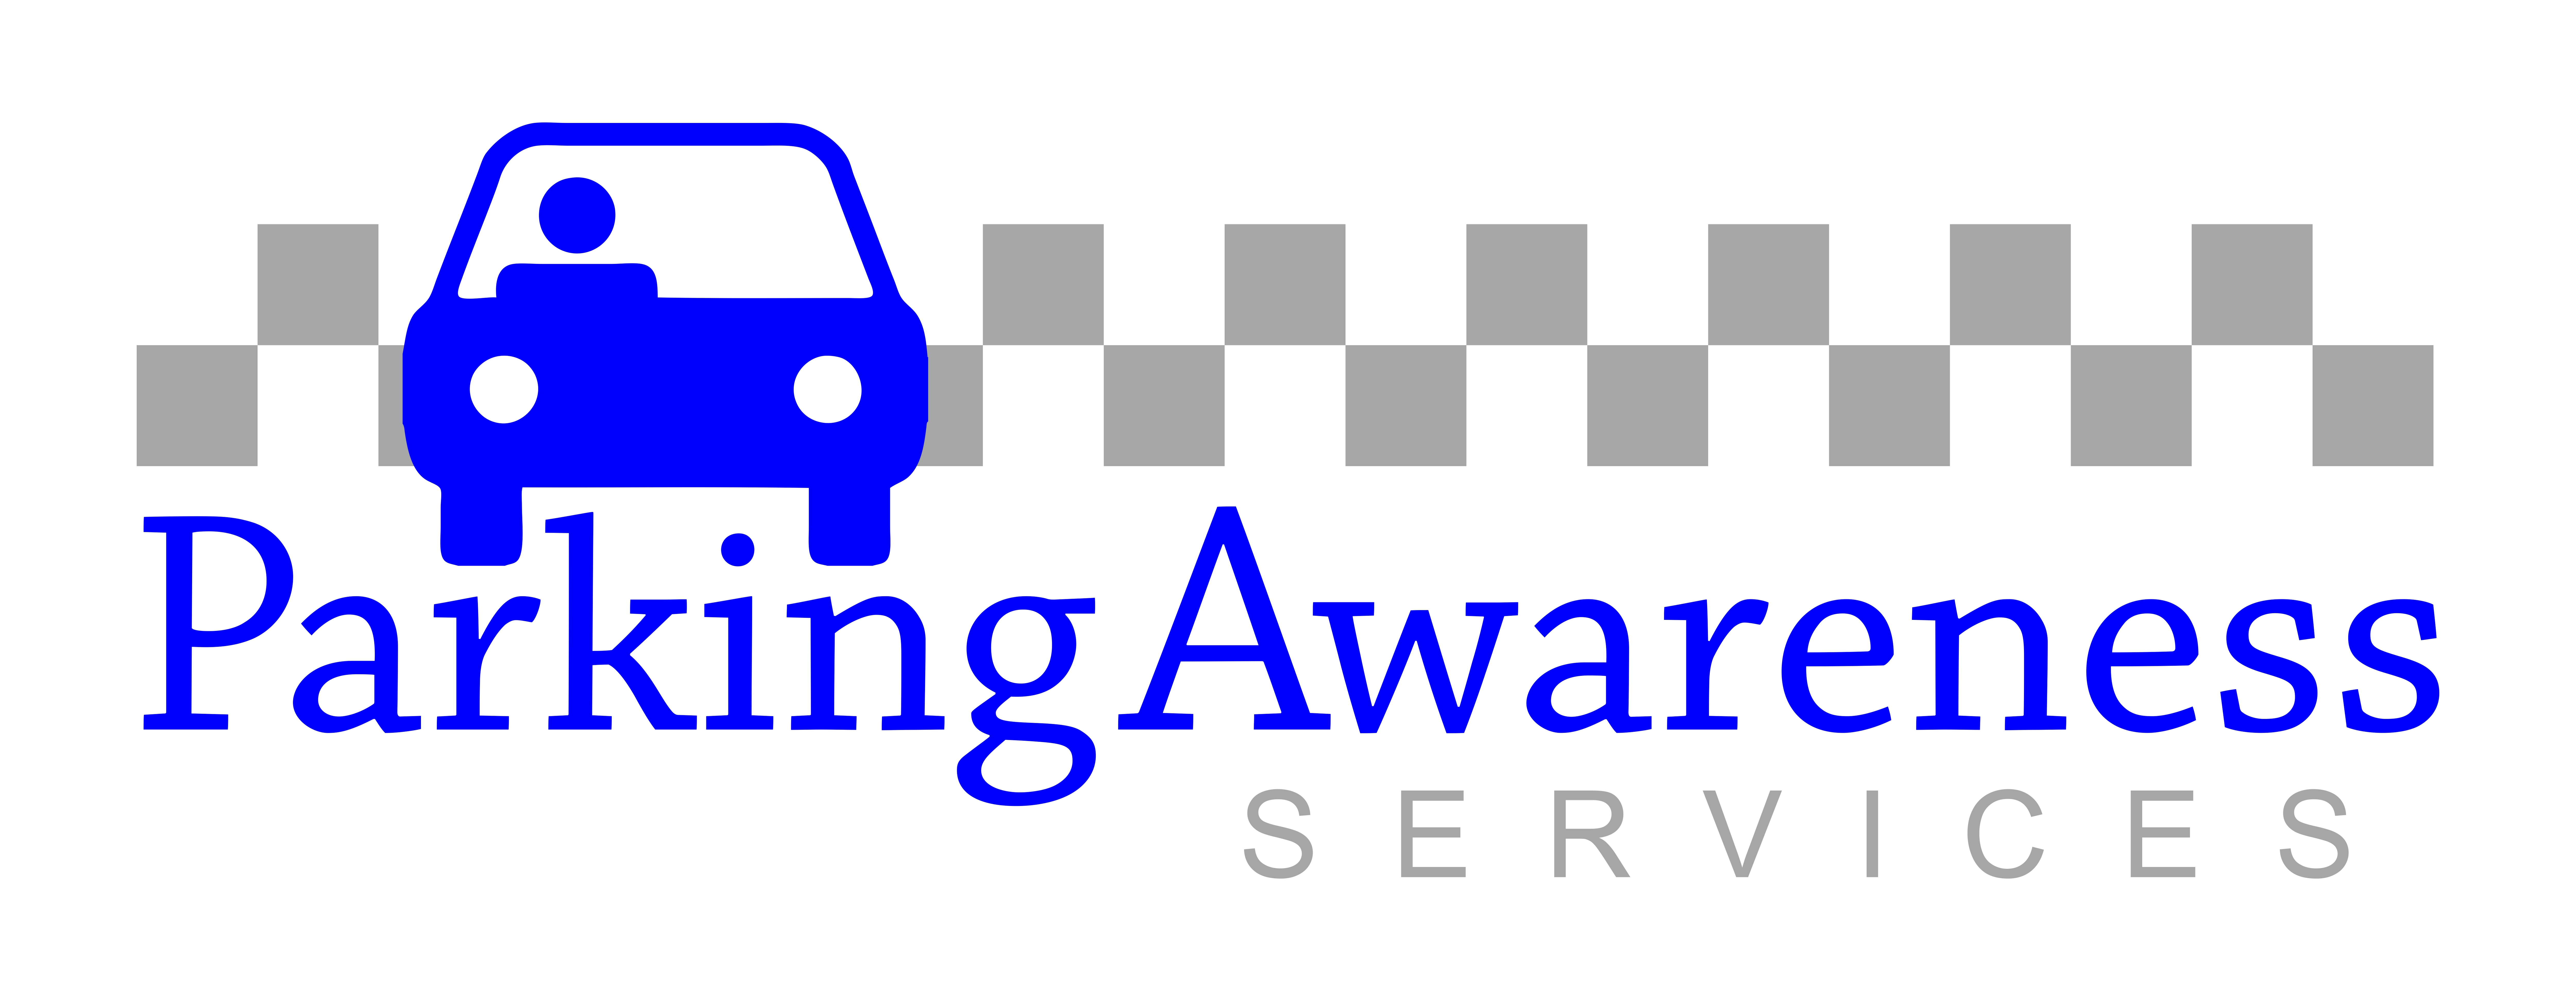 Parking Awareness Services Limited